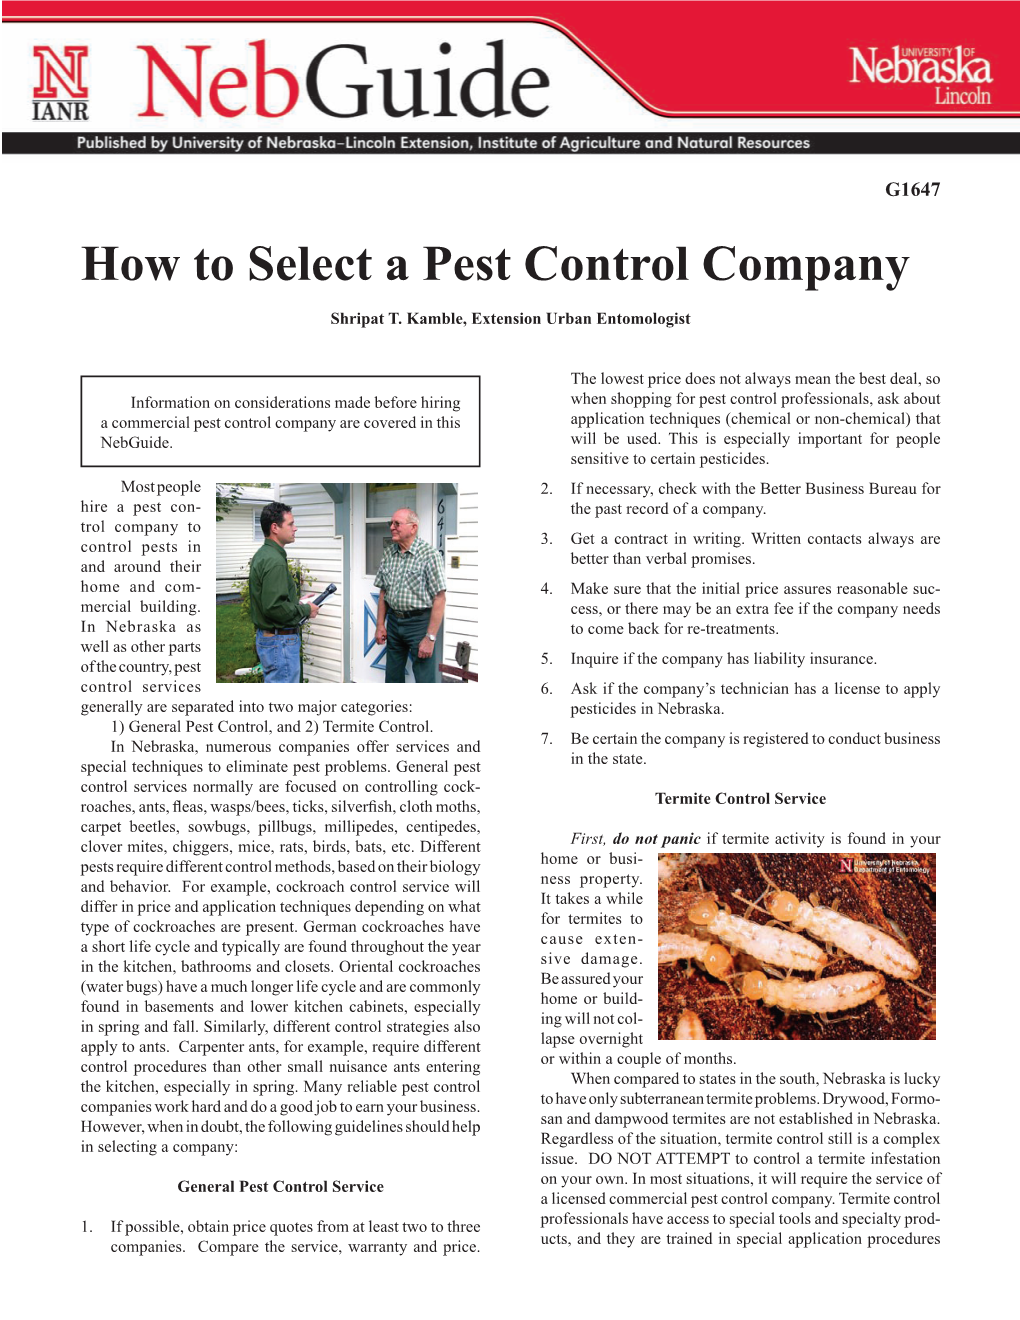 How to Select a Pest Control Company